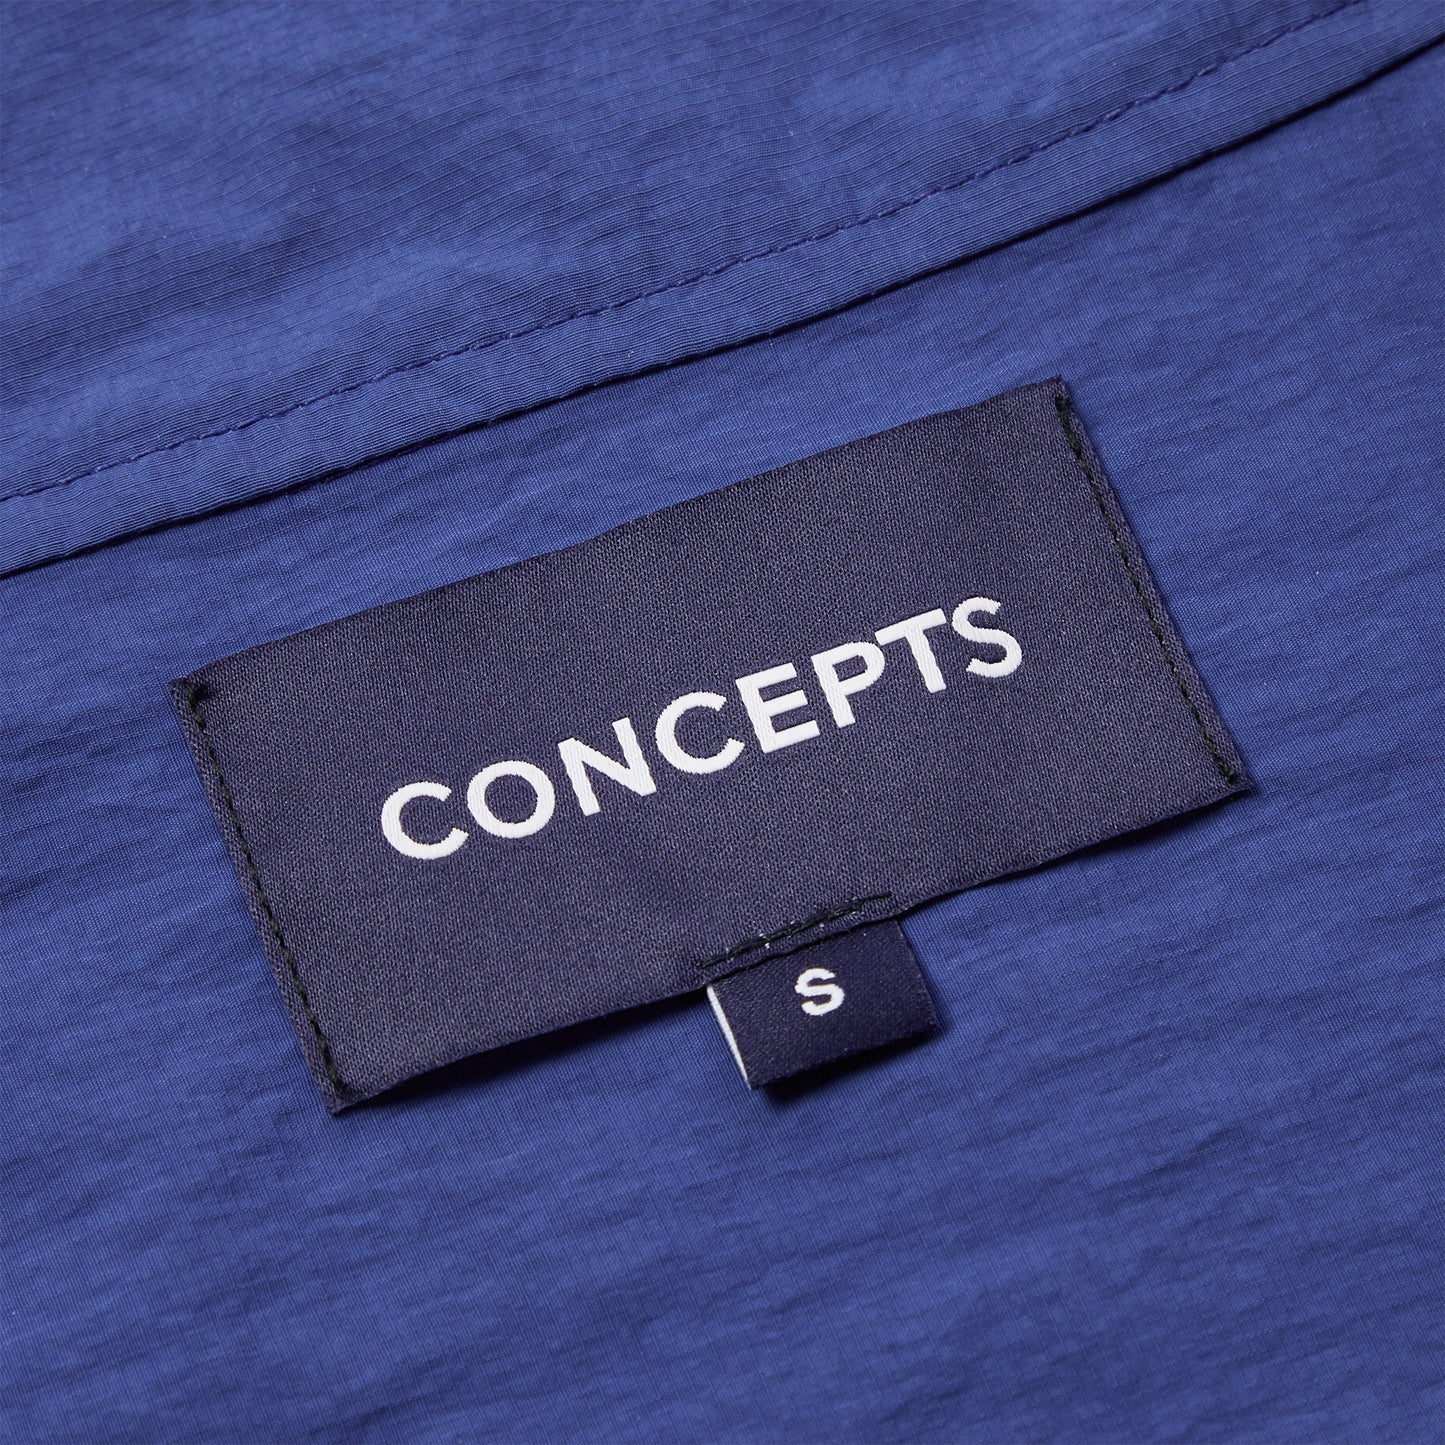 Concepts Mock Neck Pullover (French Blue)